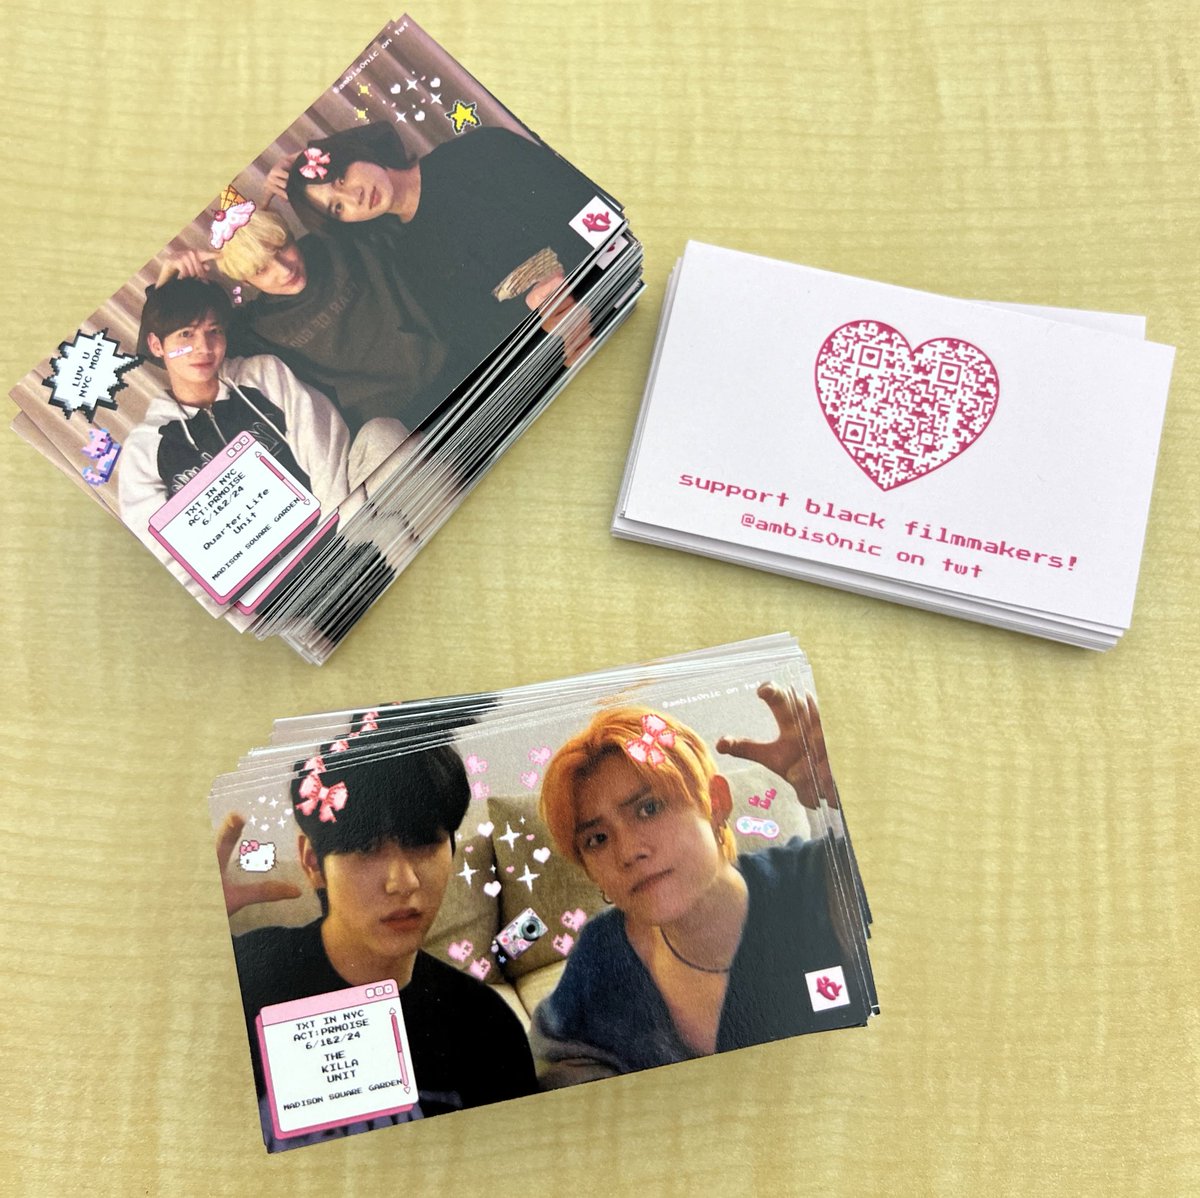 WADDUP NYC MOAAAAA! IM GIVING OUT FREEBIES BOTH DAYS!! 💌🕊️
#txt #tomorrowxtogether #nyc #TXT_TOUR_ACTPROMISE 
#ACTPROMISE_IN_NYC
#TXT_IN_NYC #freebies #moa #msg